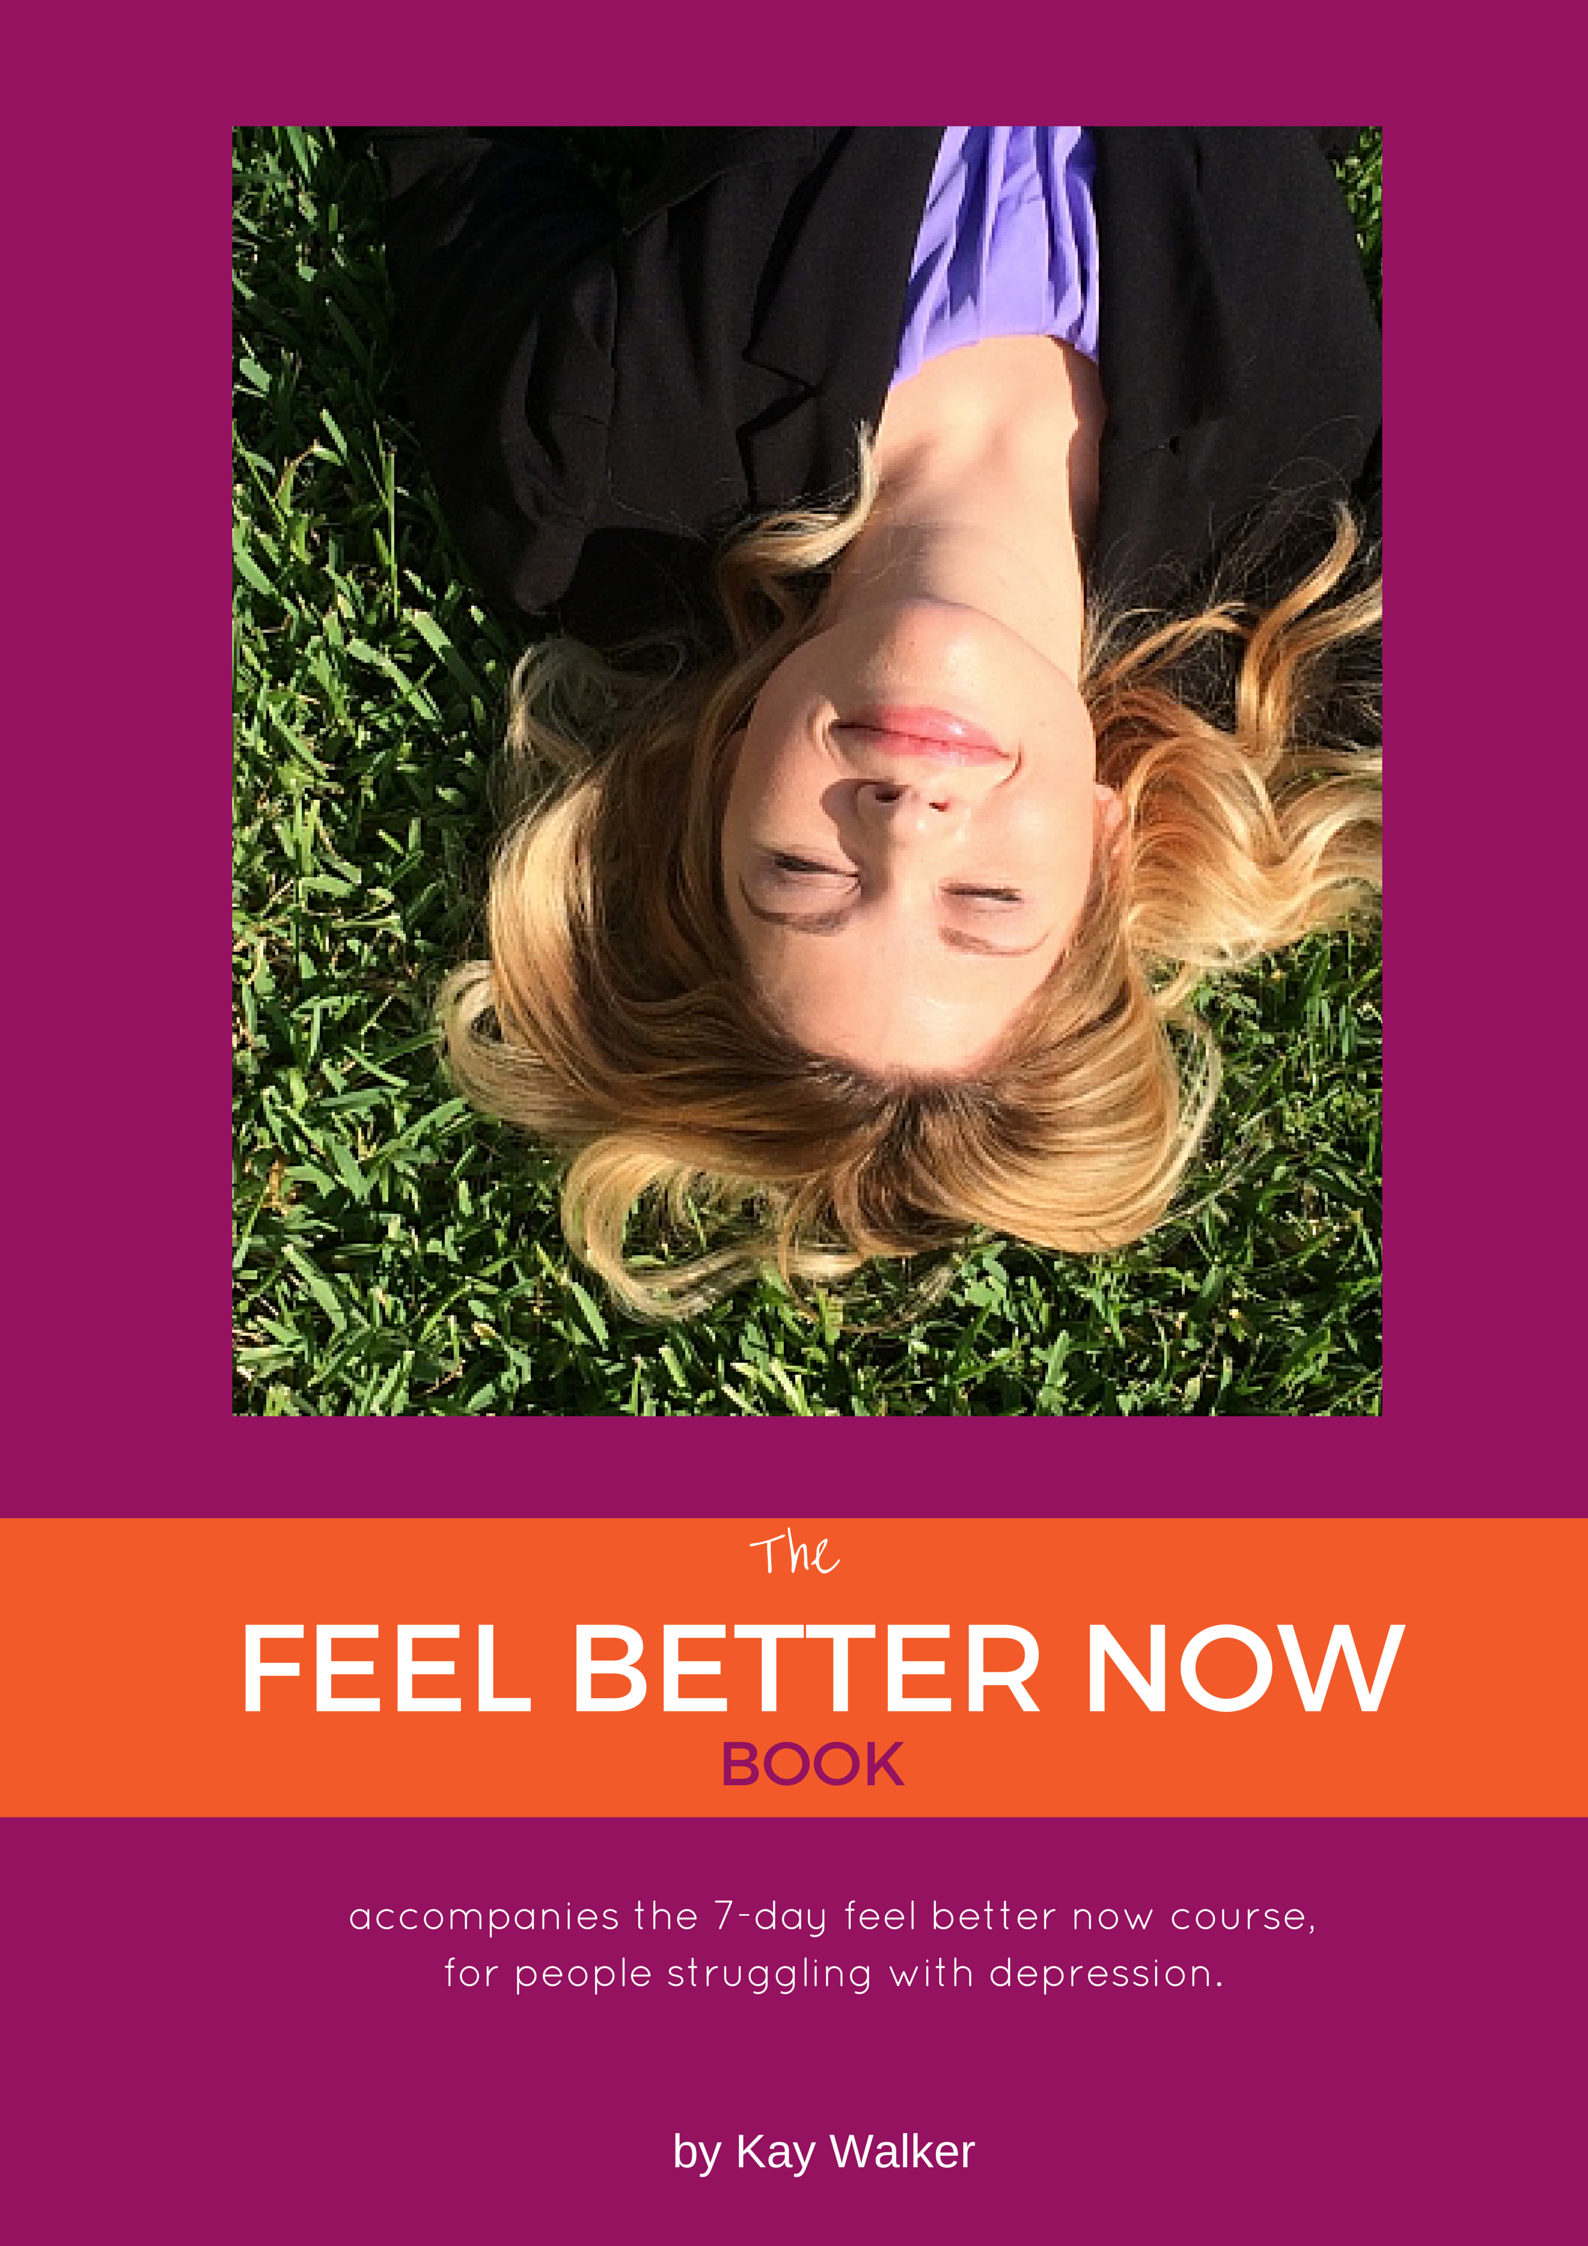 The Feel Better Now Book by happiness expert Kay Walker